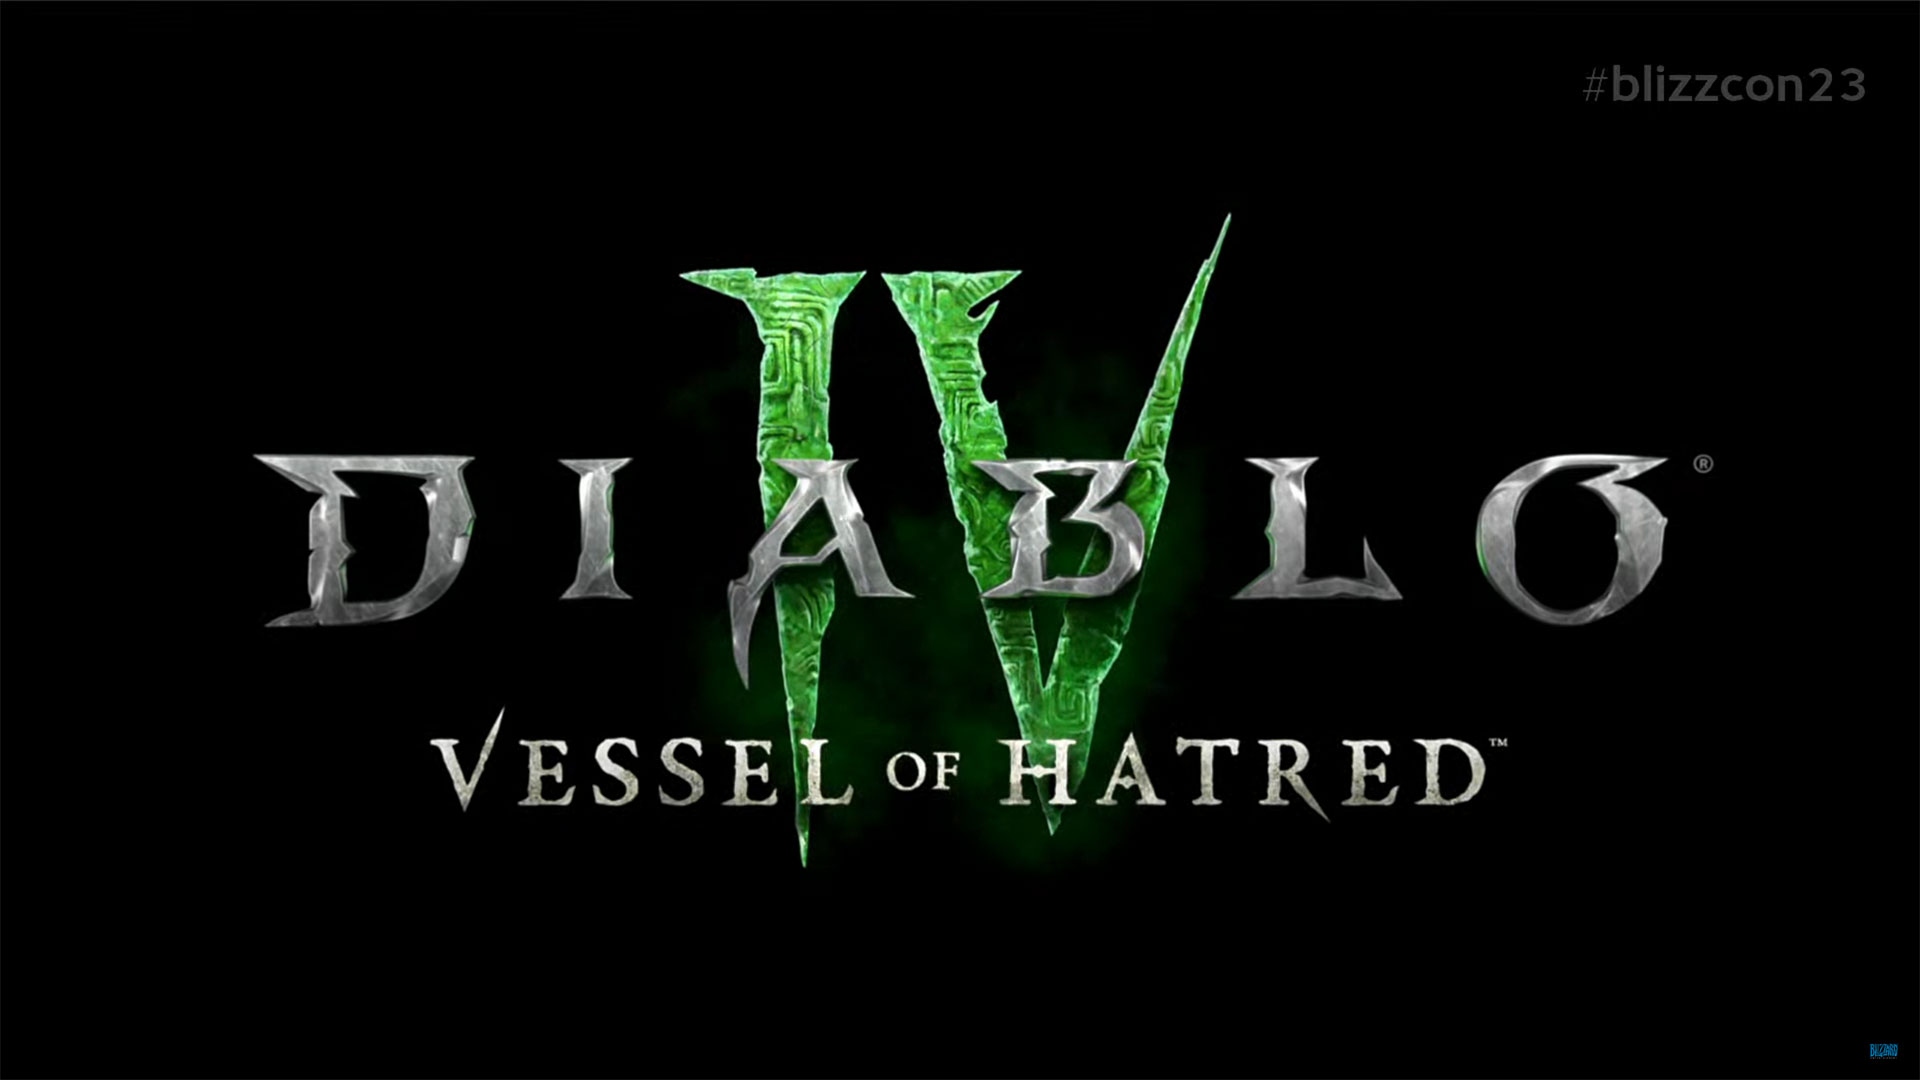 Diablo IV has already announced its first expansion, Vessel of Hatred